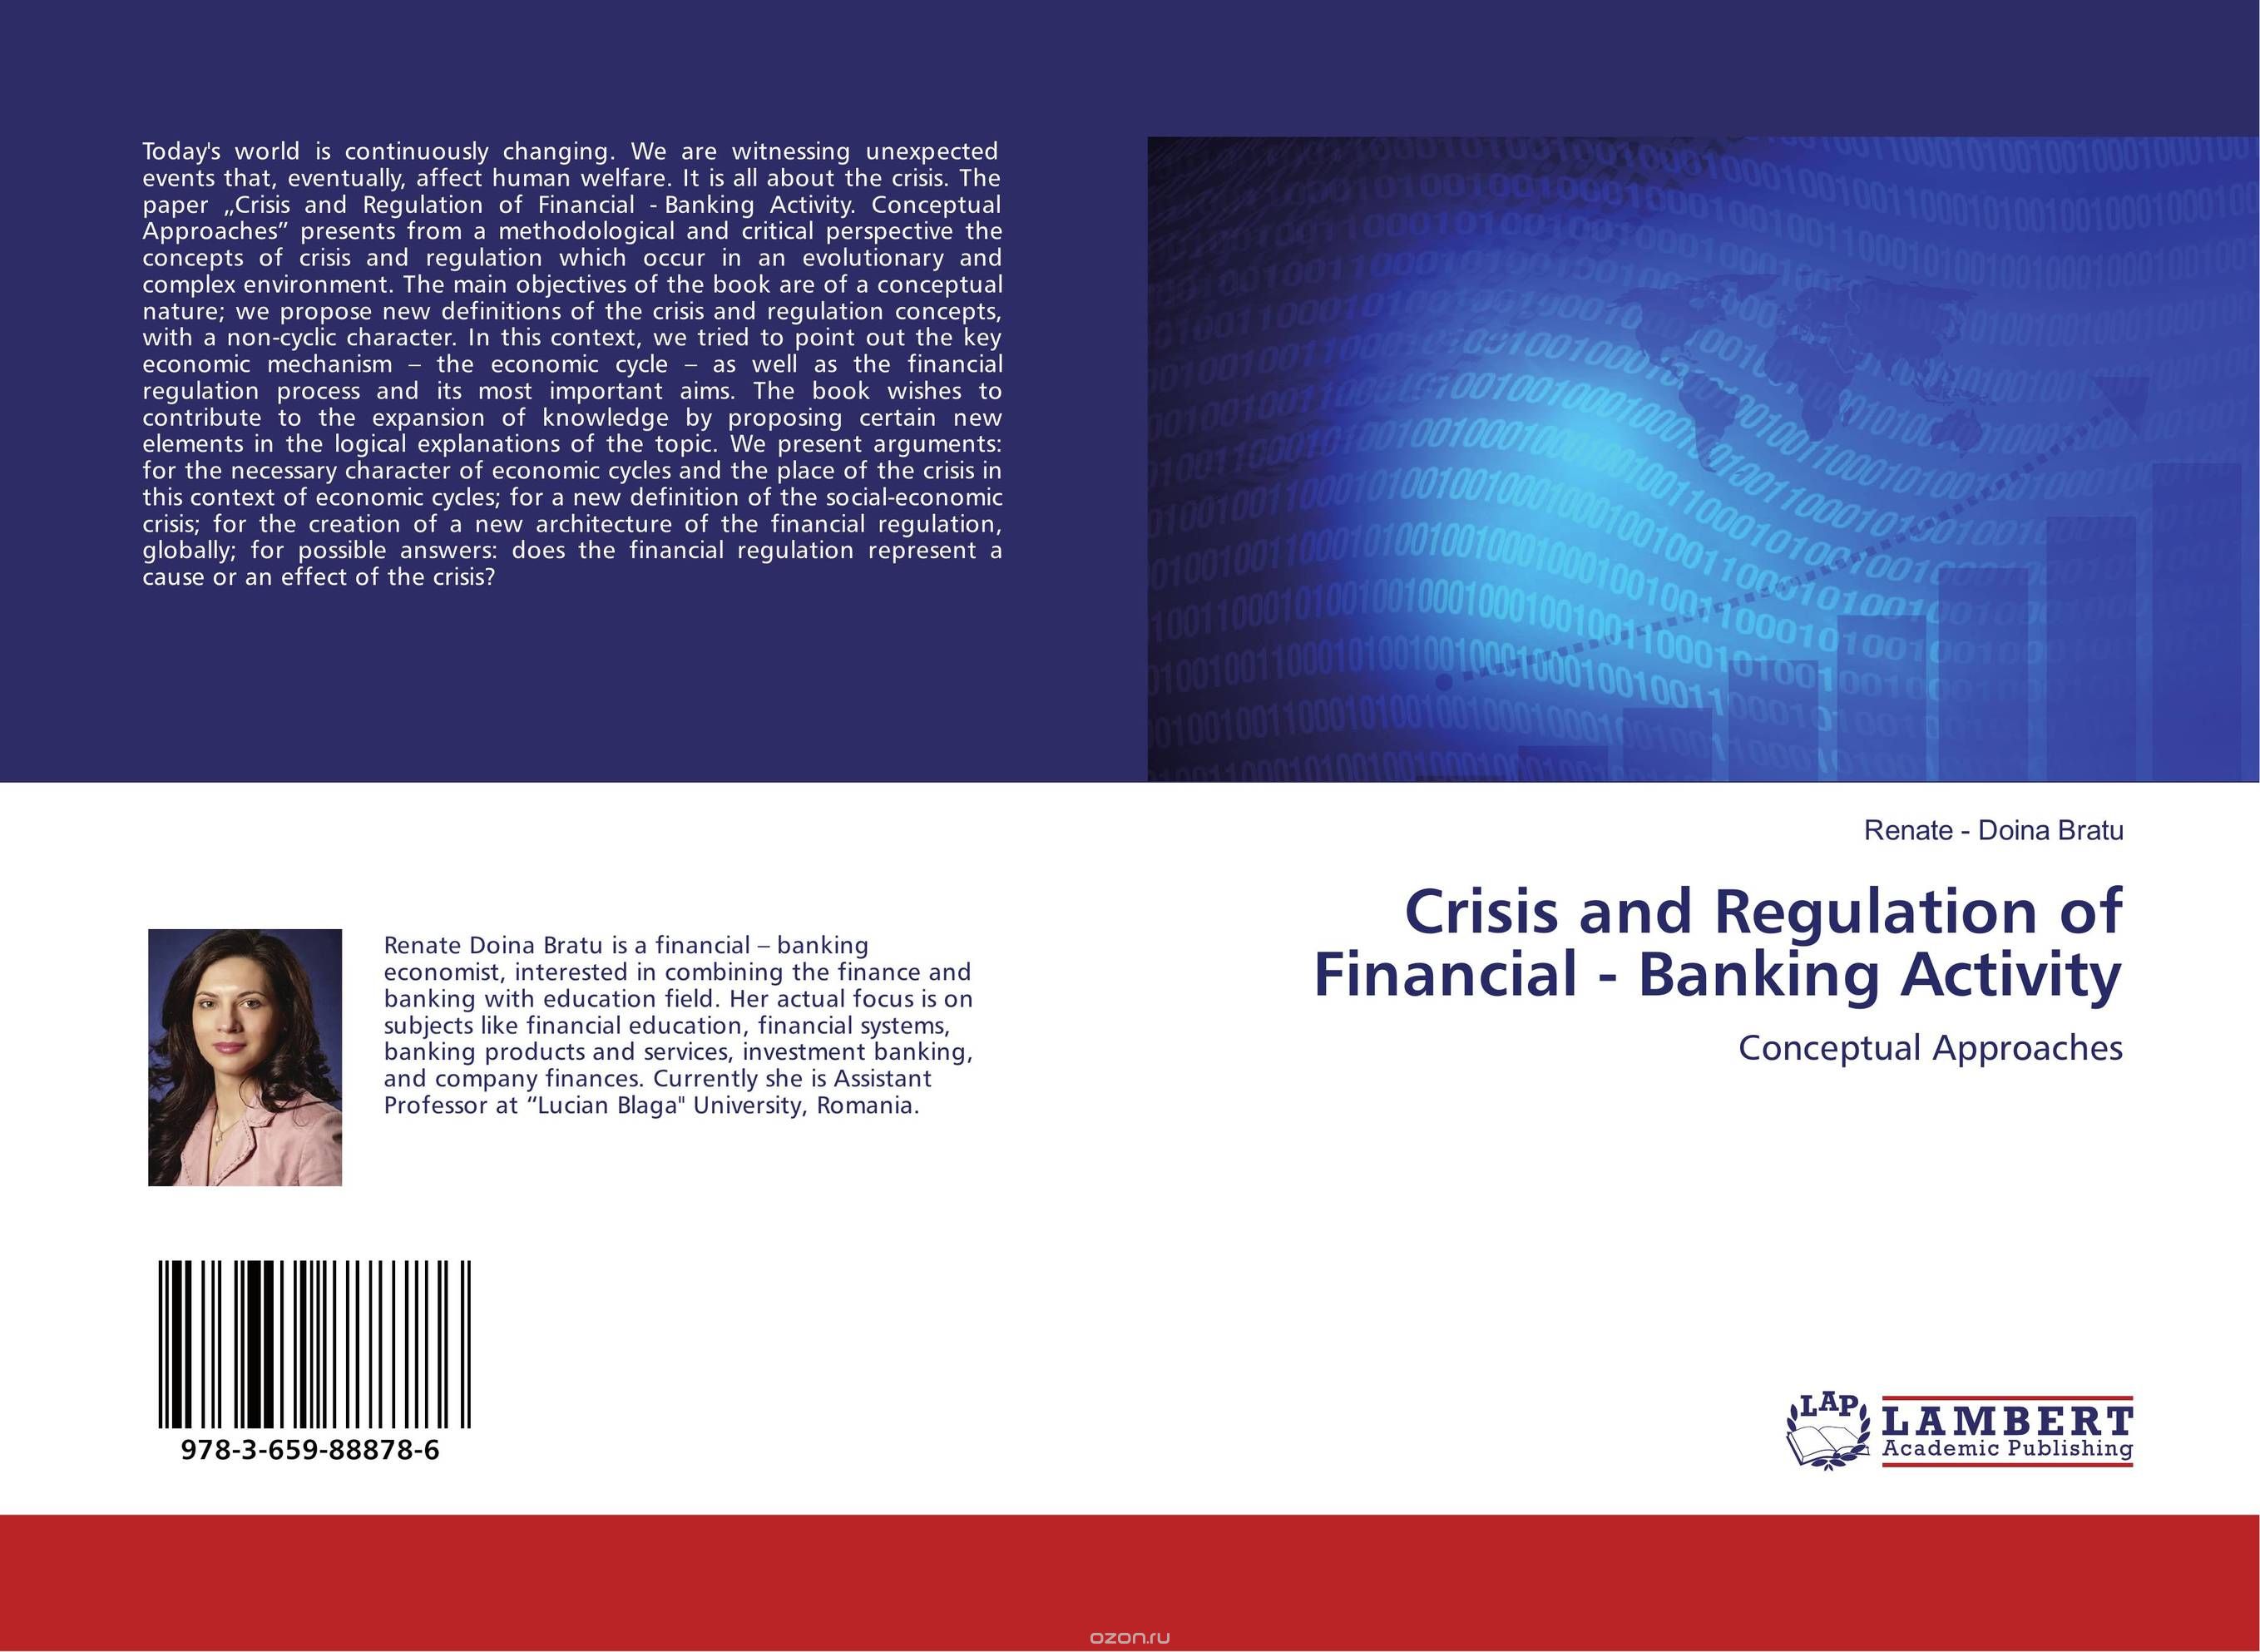 Crisis and Regulation of Financial - Banking Activity